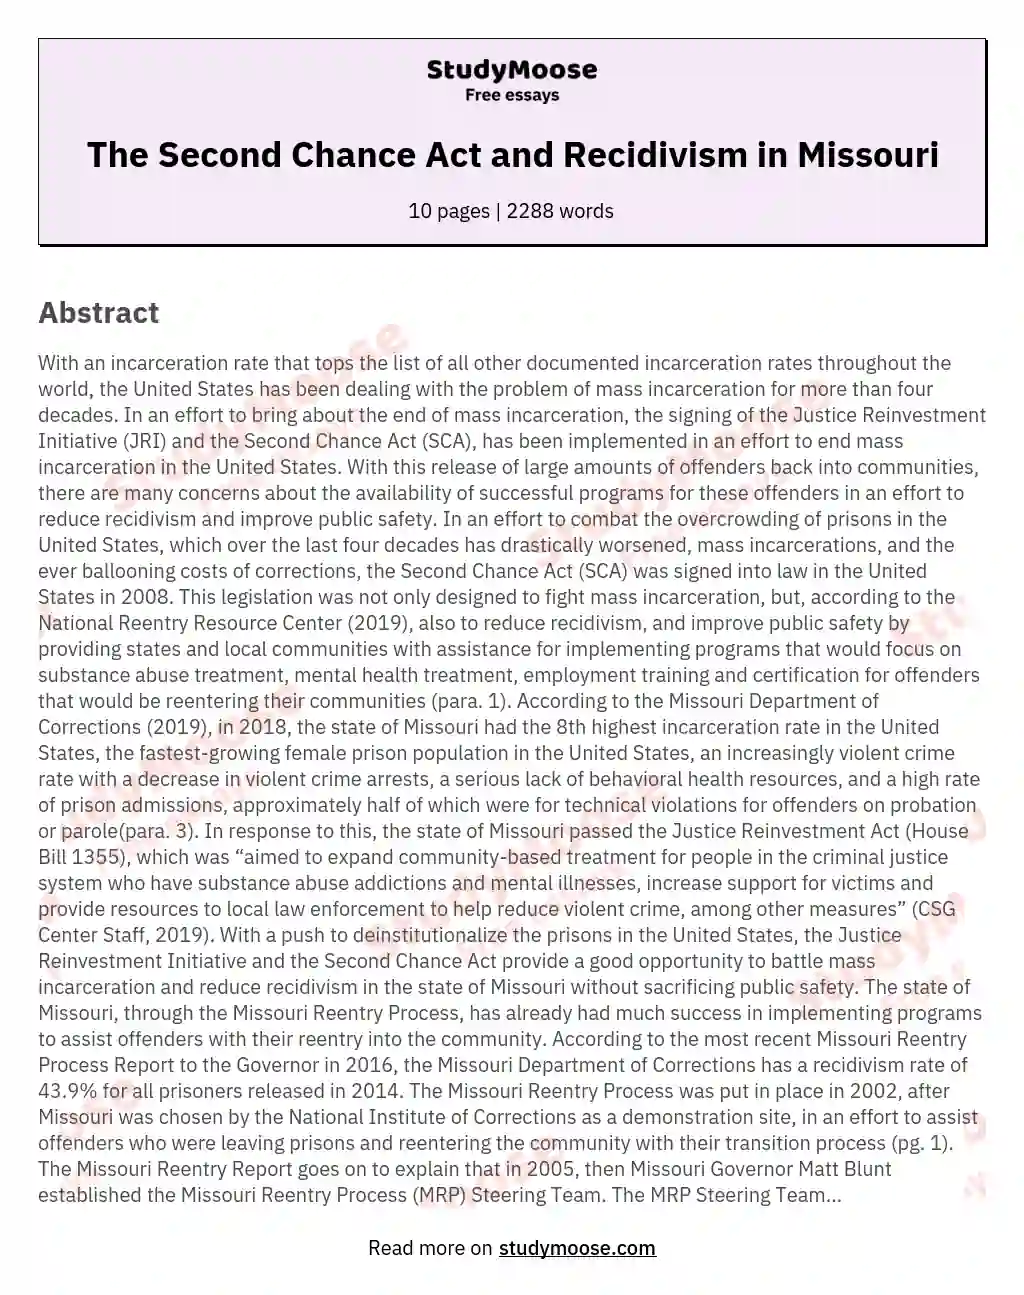 The Second Chance Act and Recidivism in Missouri